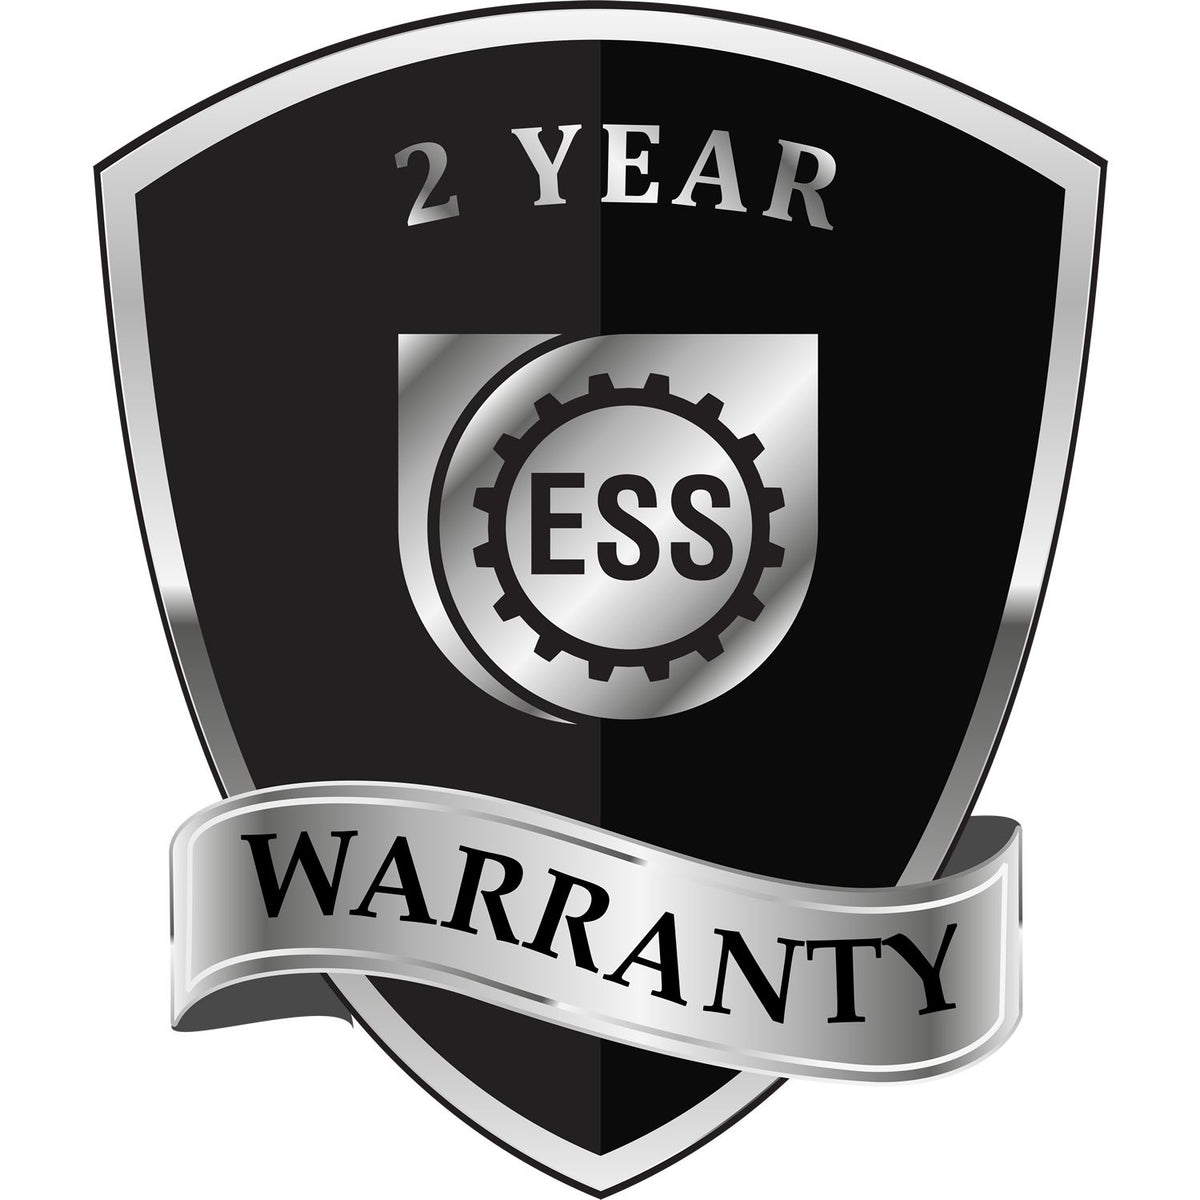 A black and silver badge or emblem showing warranty information for the Hybrid South Dakota Geologist Seal